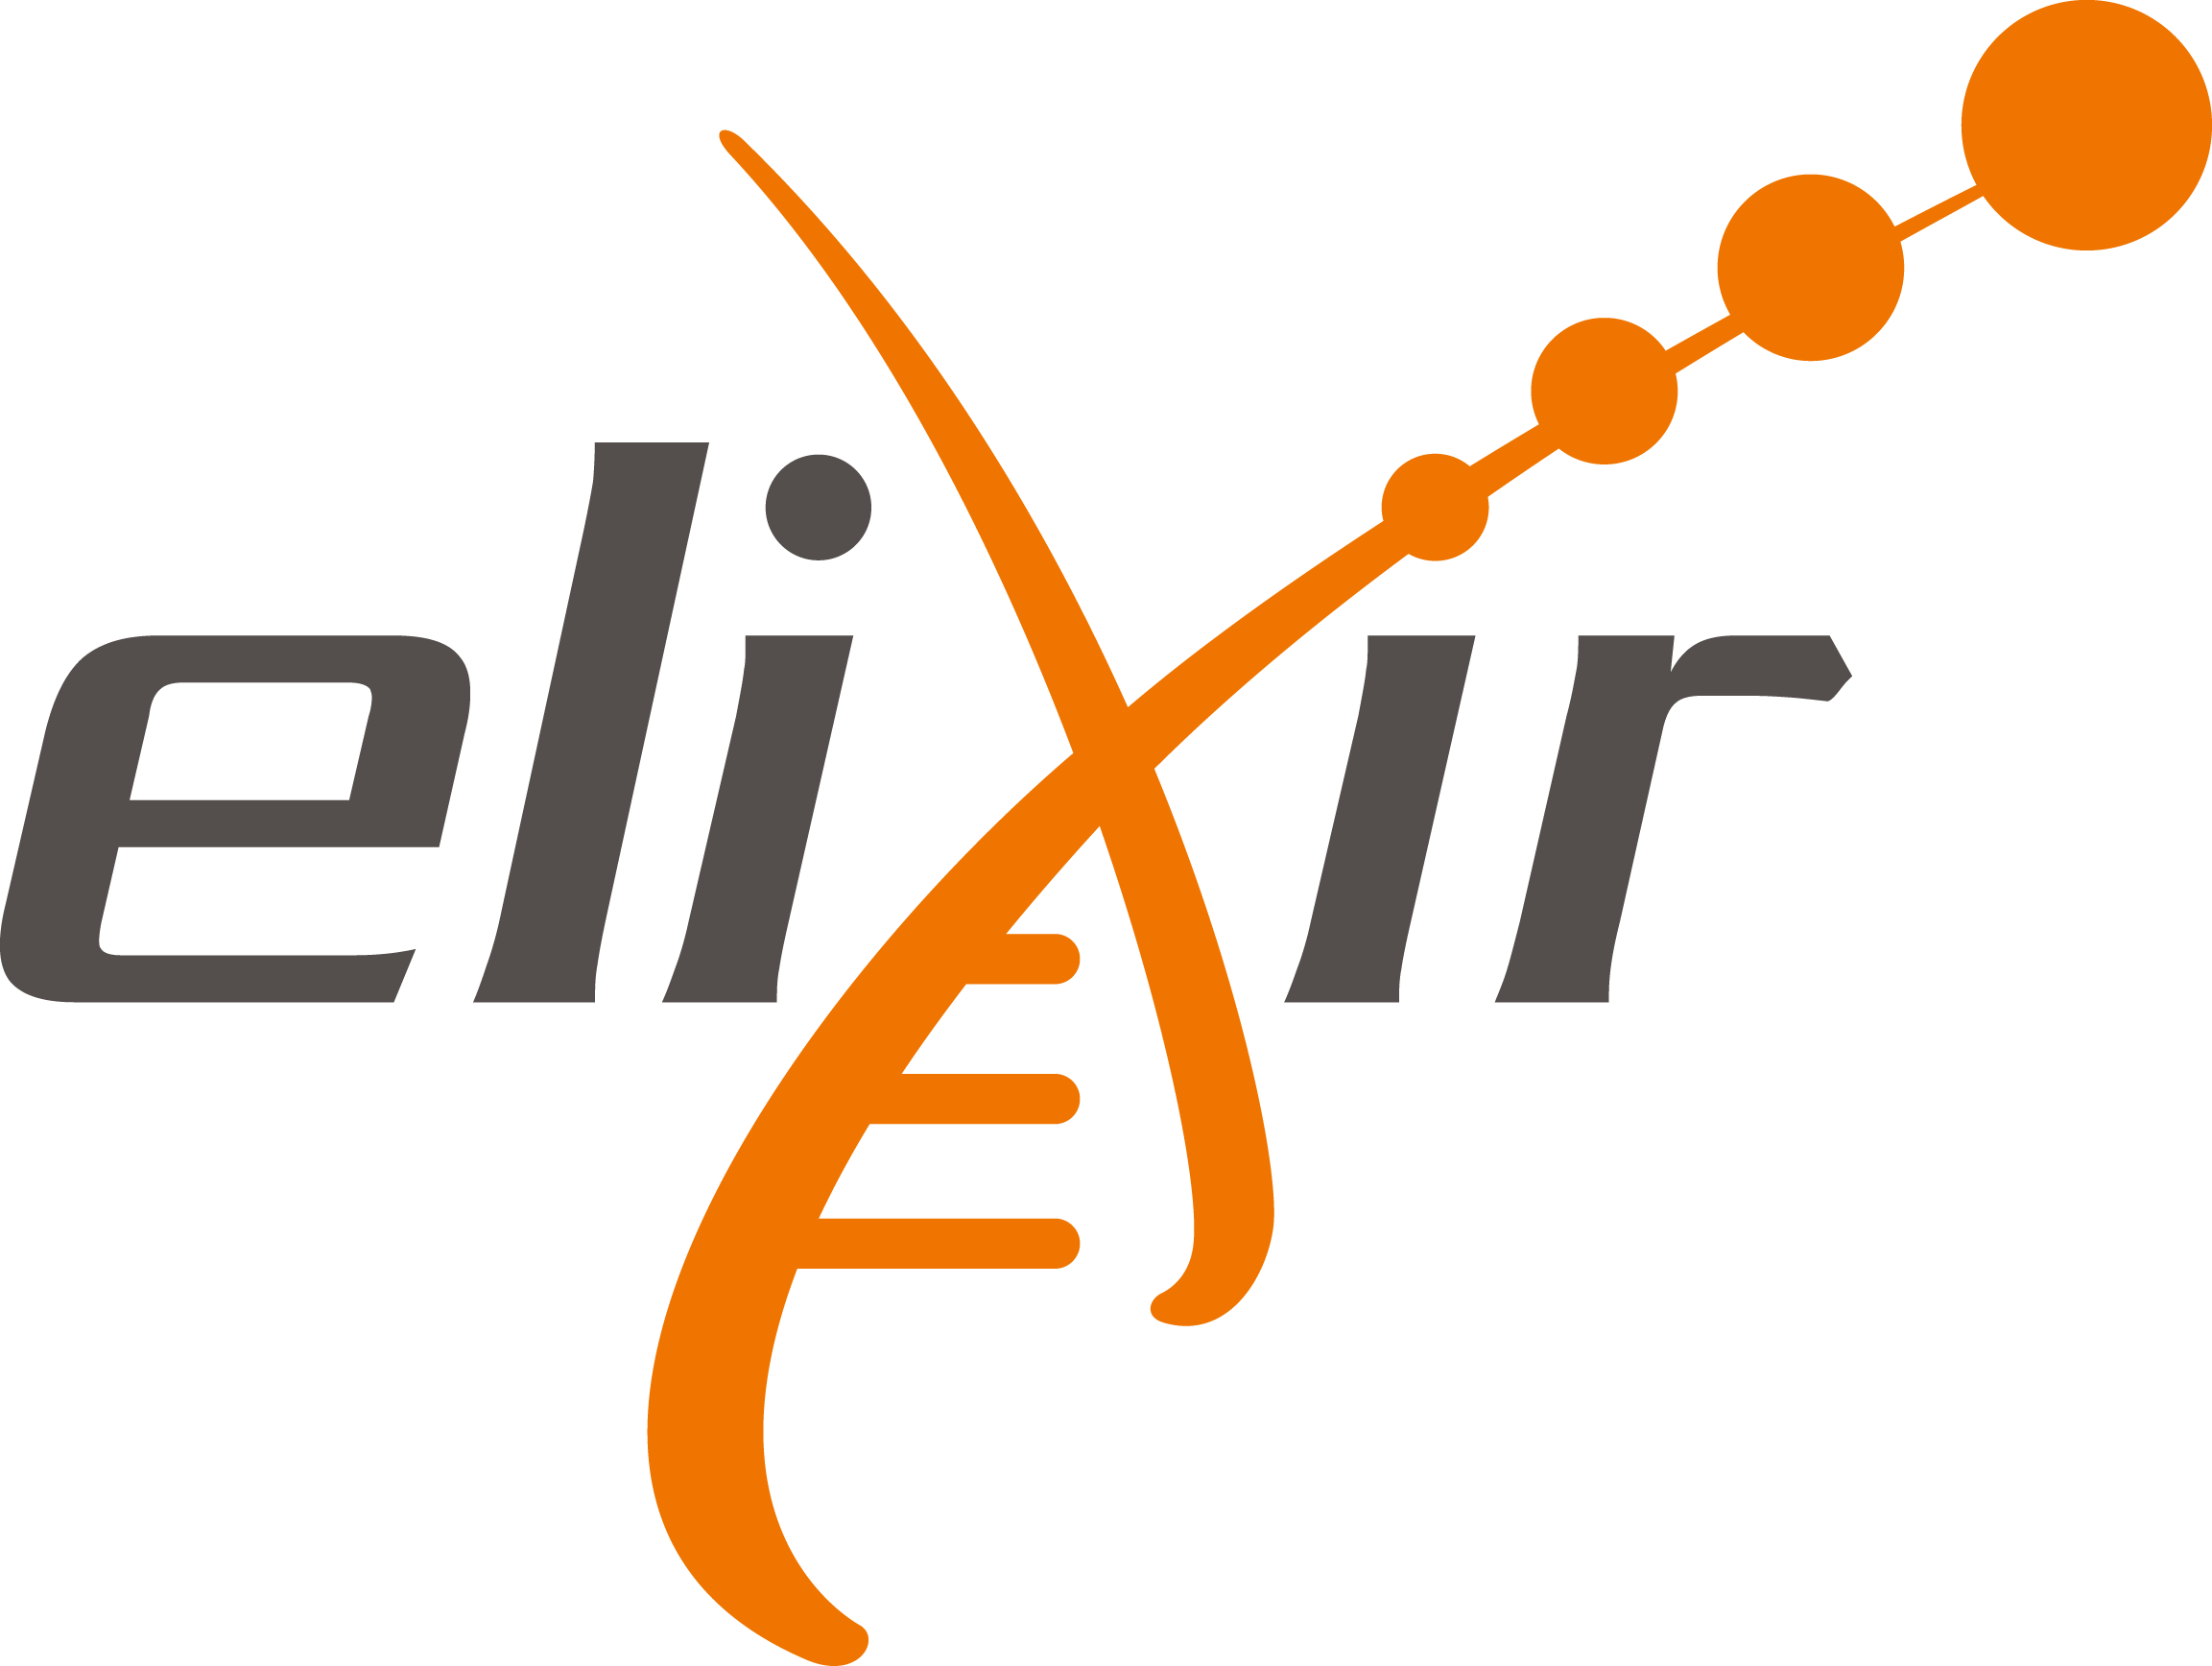 The ELIXIR Europe logo, the word 'Elixir' with the DNA double Elixir in place of the 'x'